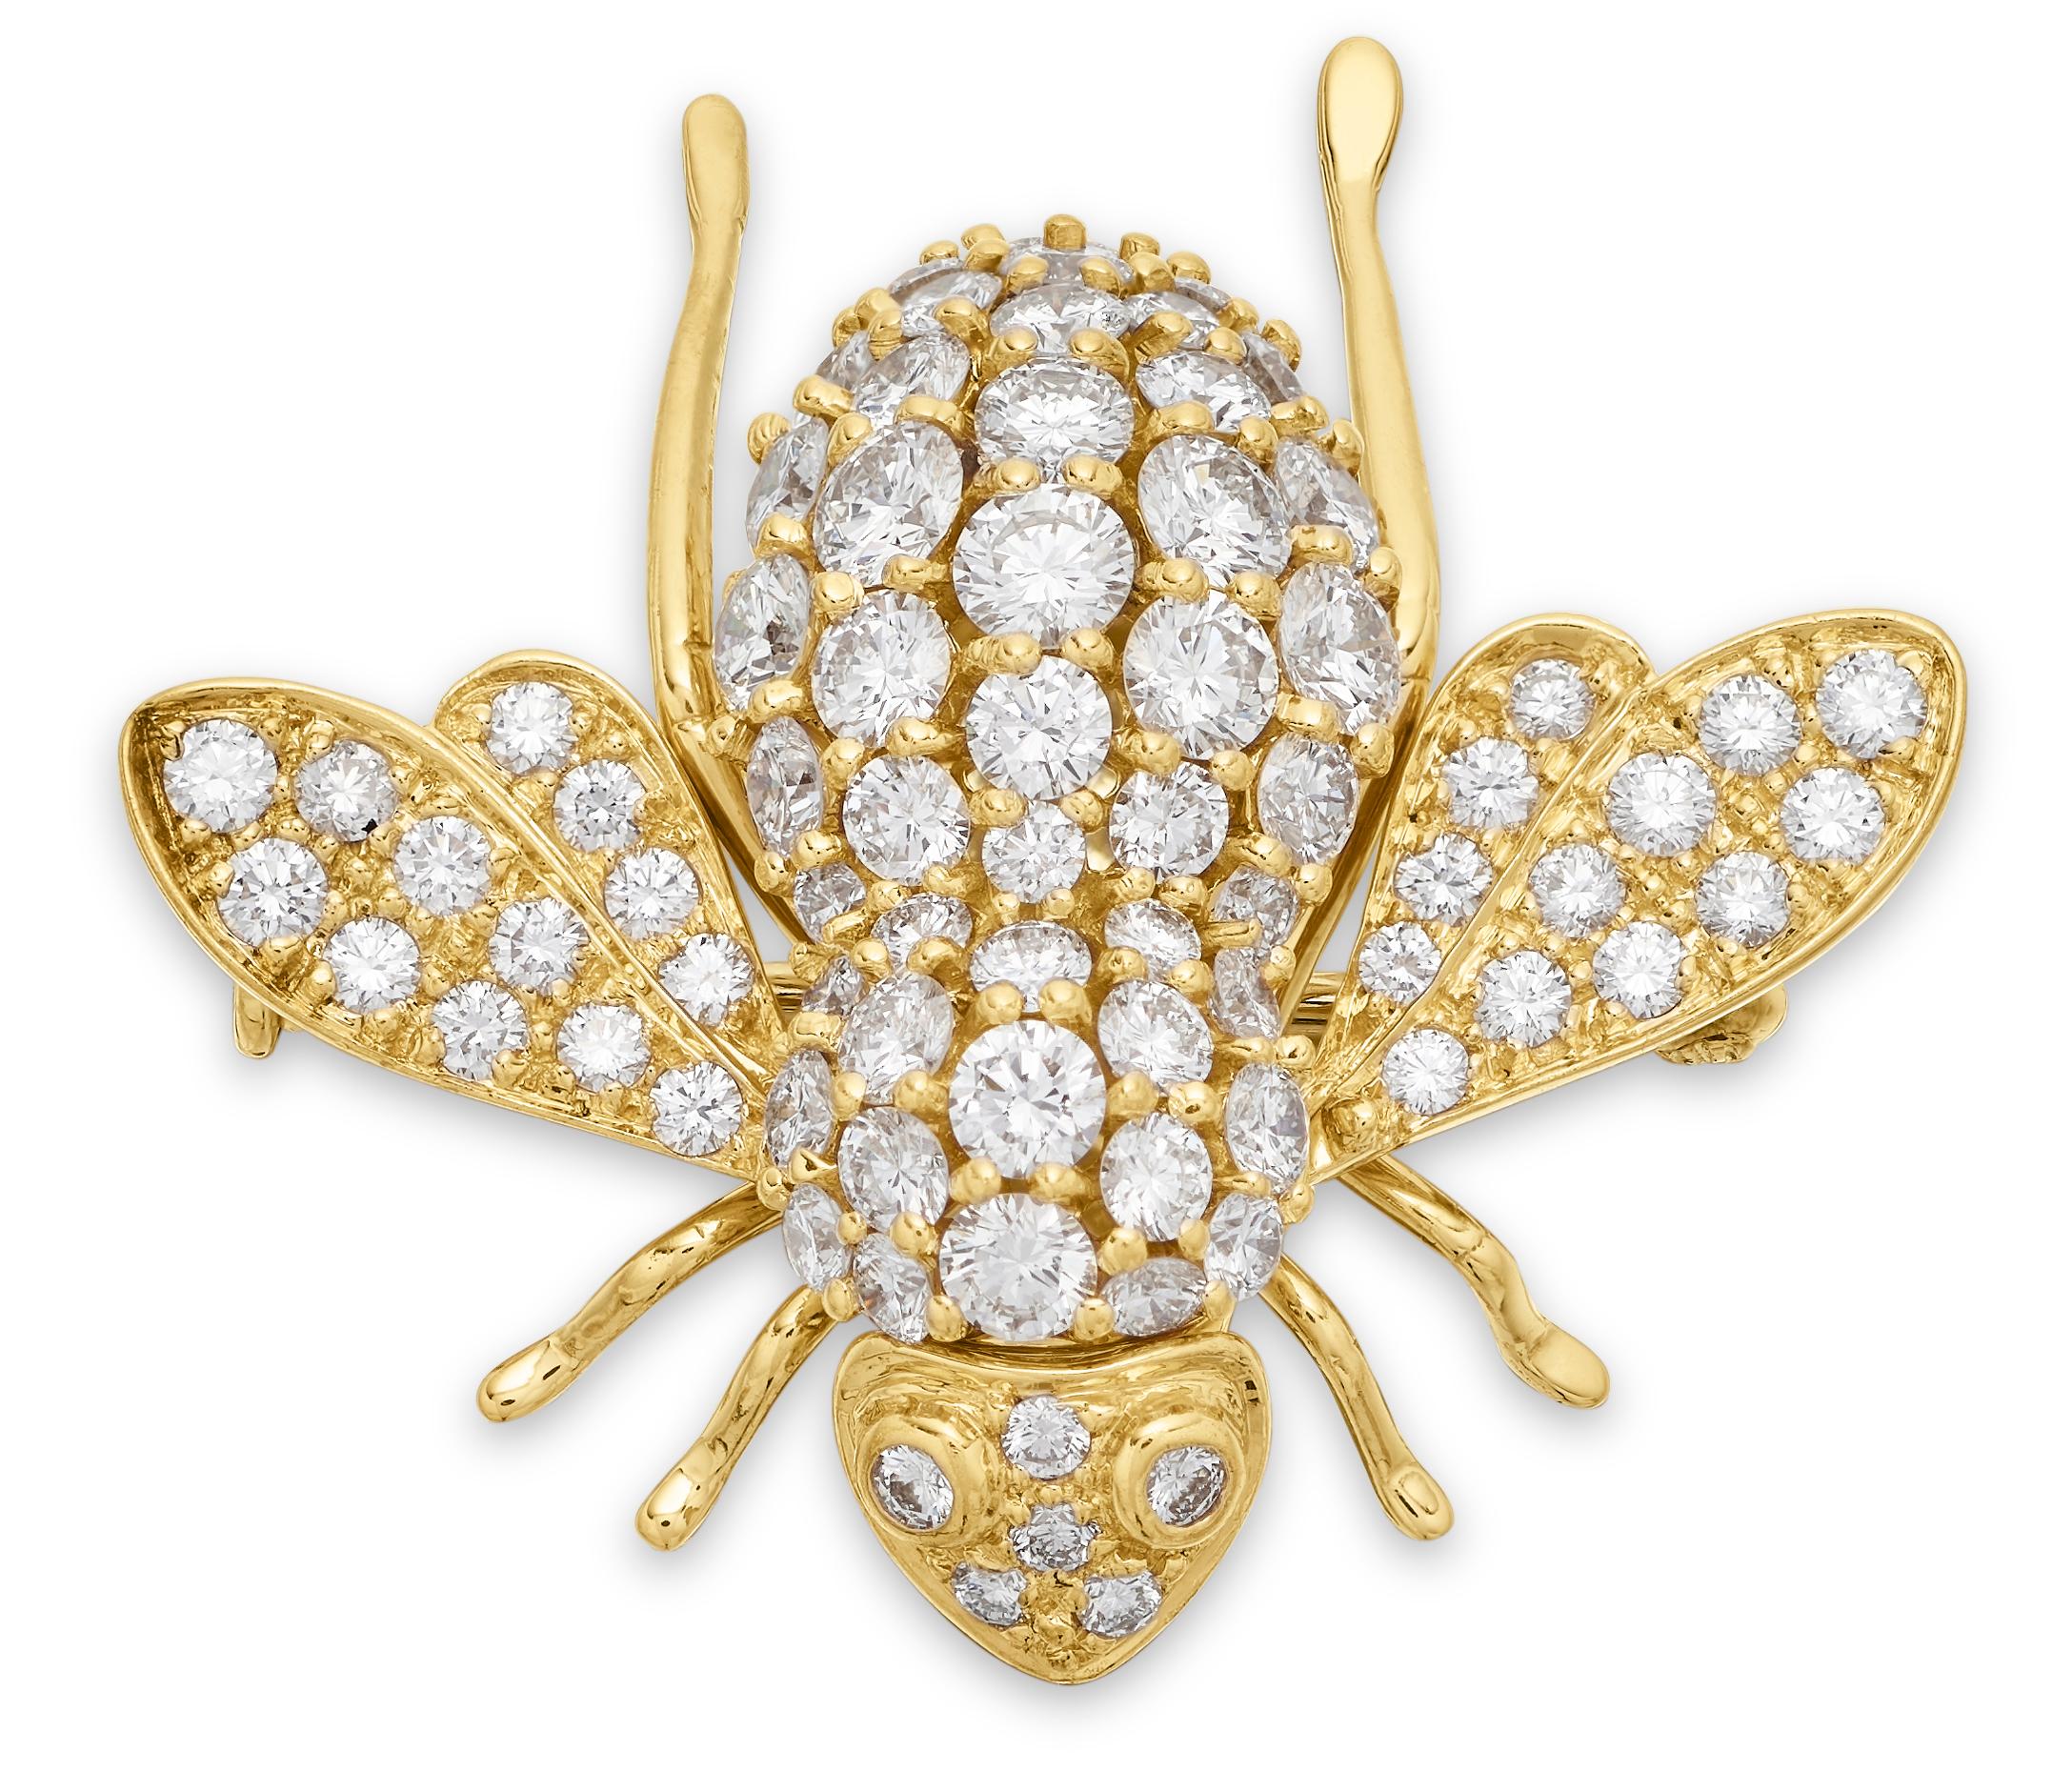 Diamond set bee brooch by Sabbadini Italian designer. Beautifully design bee brooch set with round brilliant cut dazzling diamonds. New retail price £13,500
Diamonds approximate total weight 2.90 carats, assessed colour G/H, assessed clarity VS
